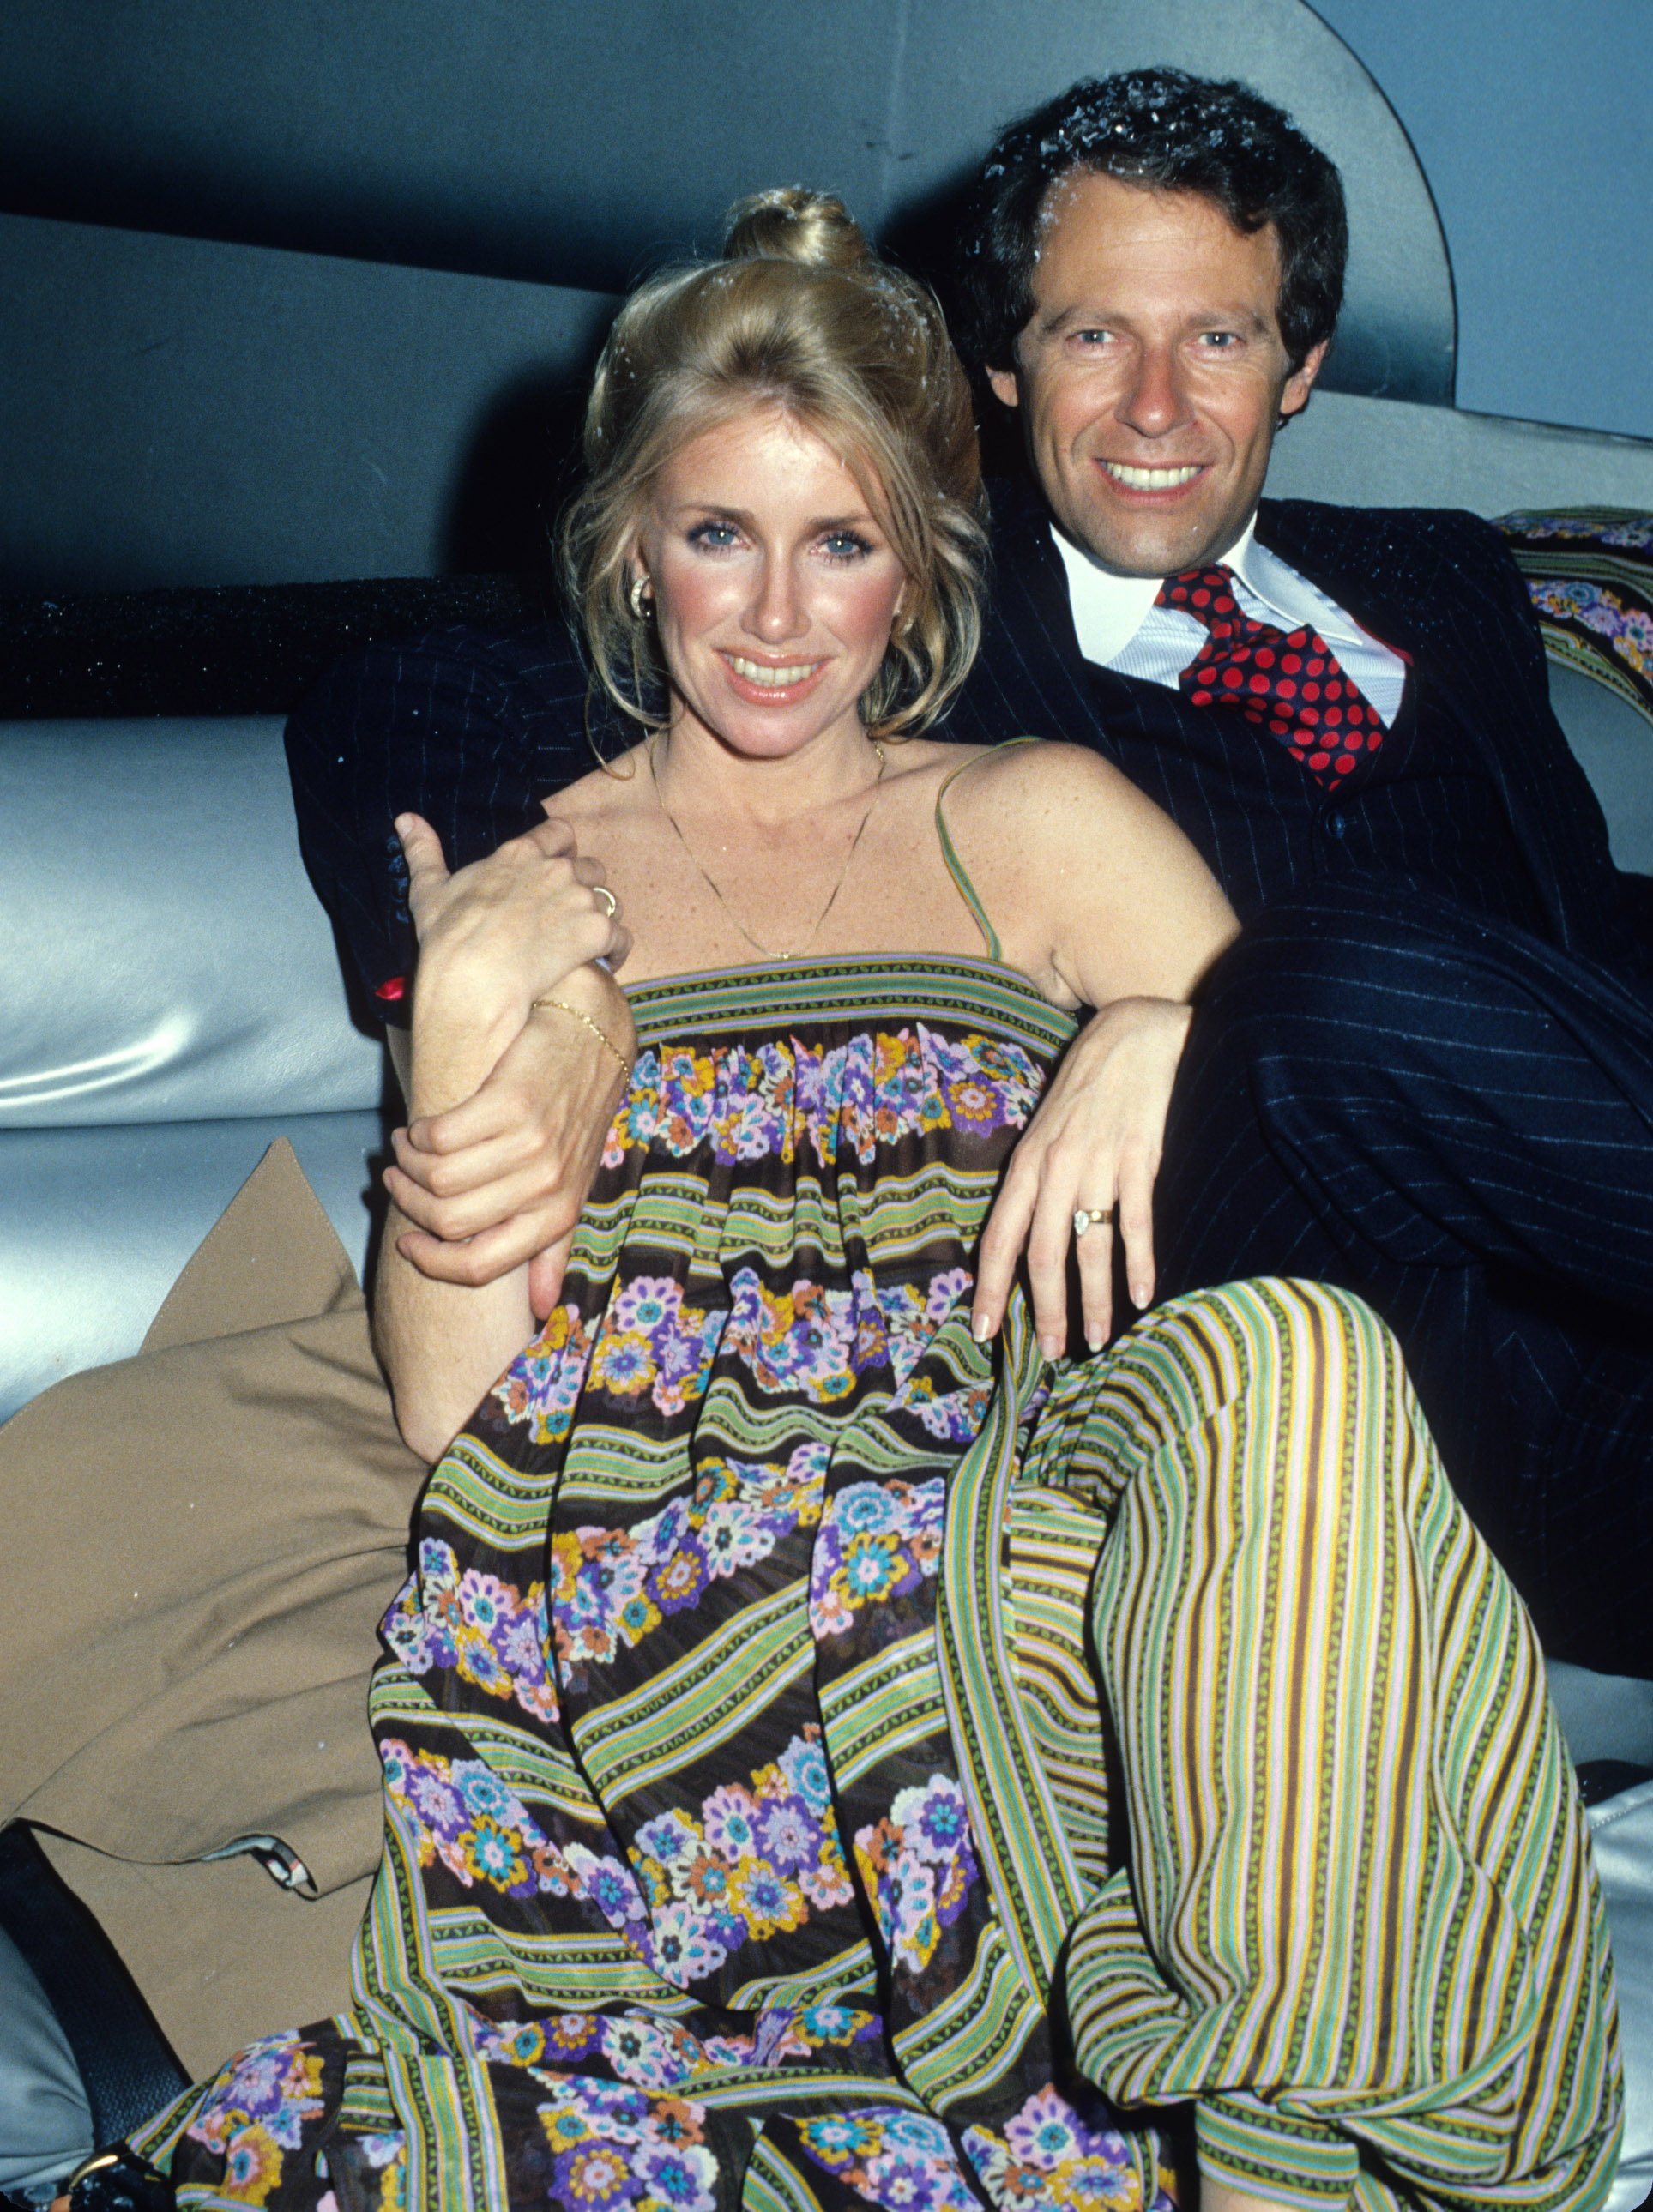 Suzanne Somers and husband Alan Hamel at Studio 54 New York on December 19, 1978 | Source: Getty Images